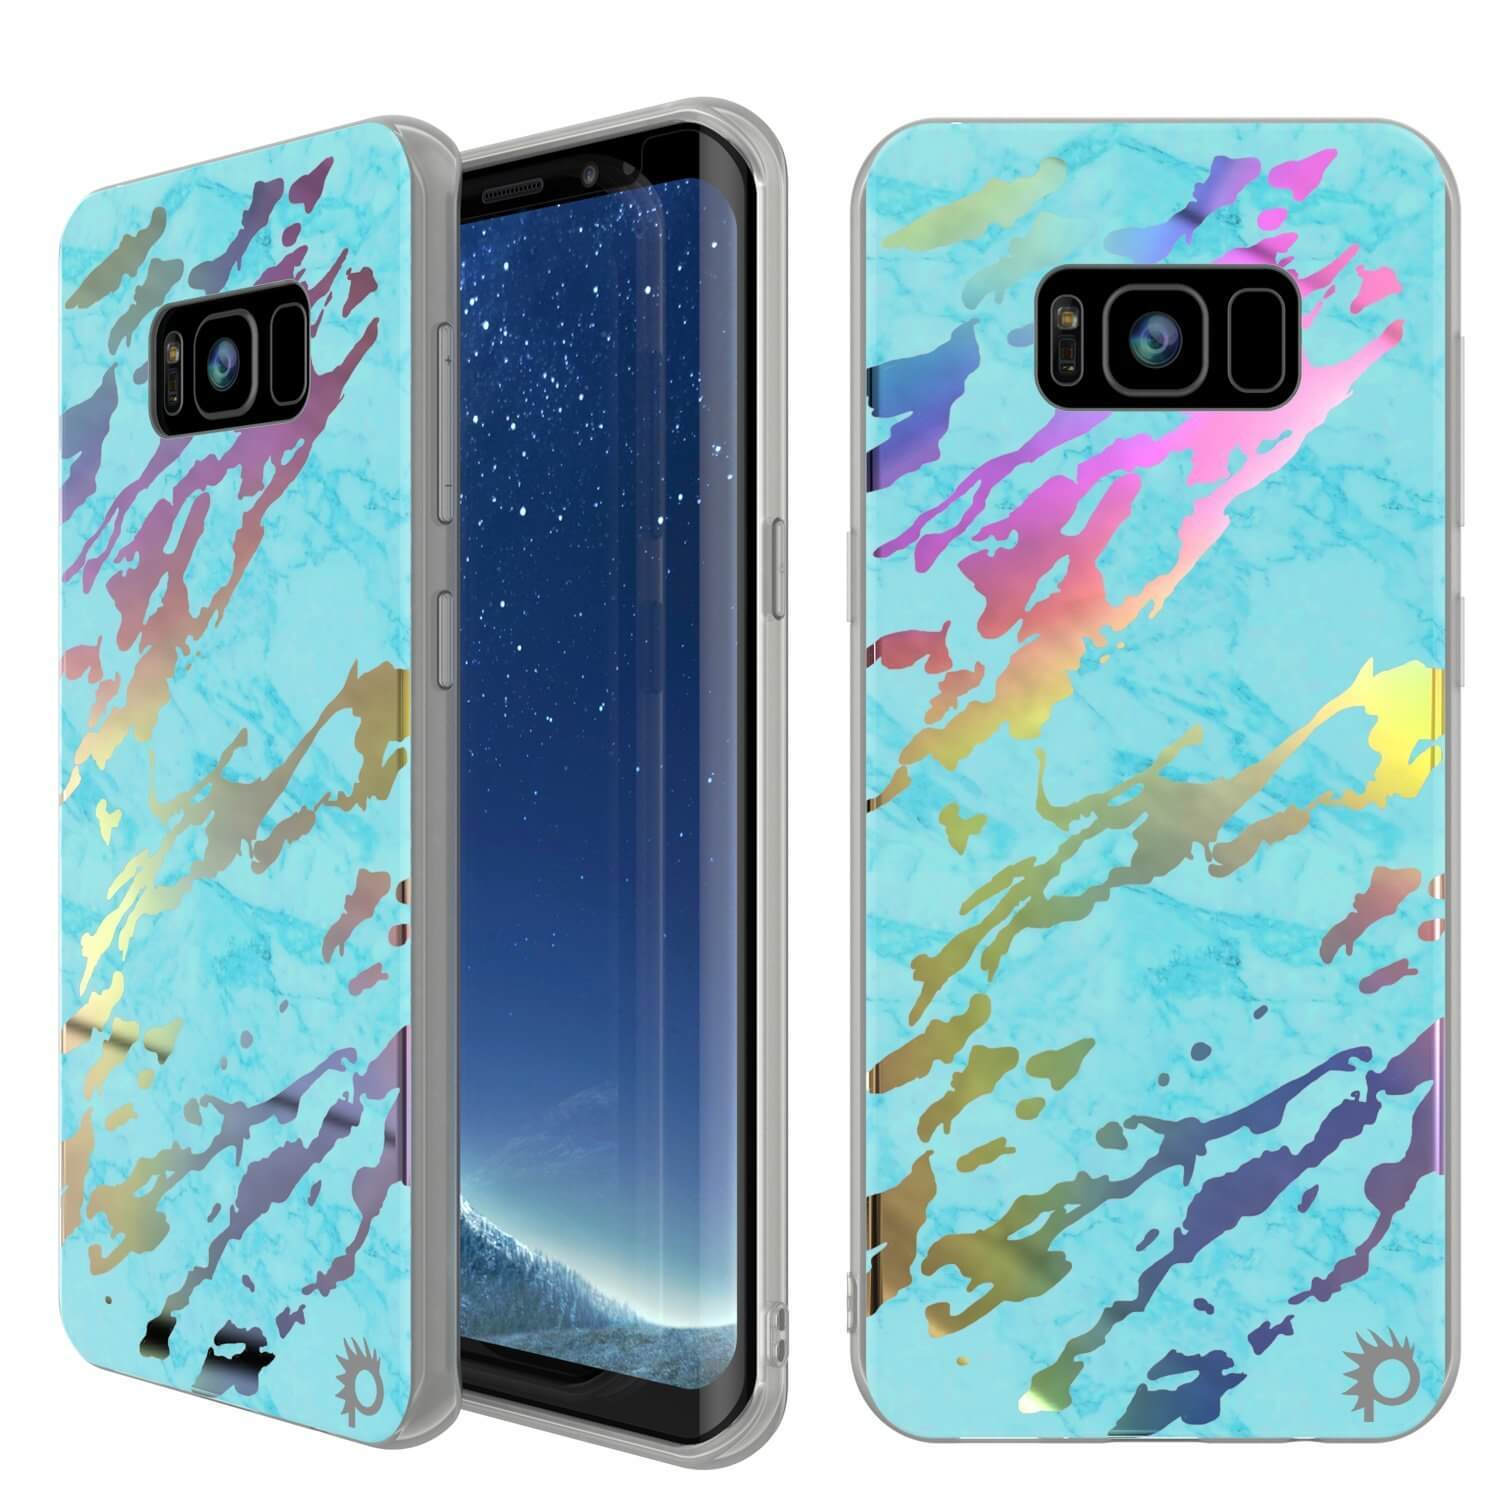 Punkcase Galaxy S8 Marble Case, Protective Full Body Cover W/PunkShield Screen Protector (Teal Onyx)